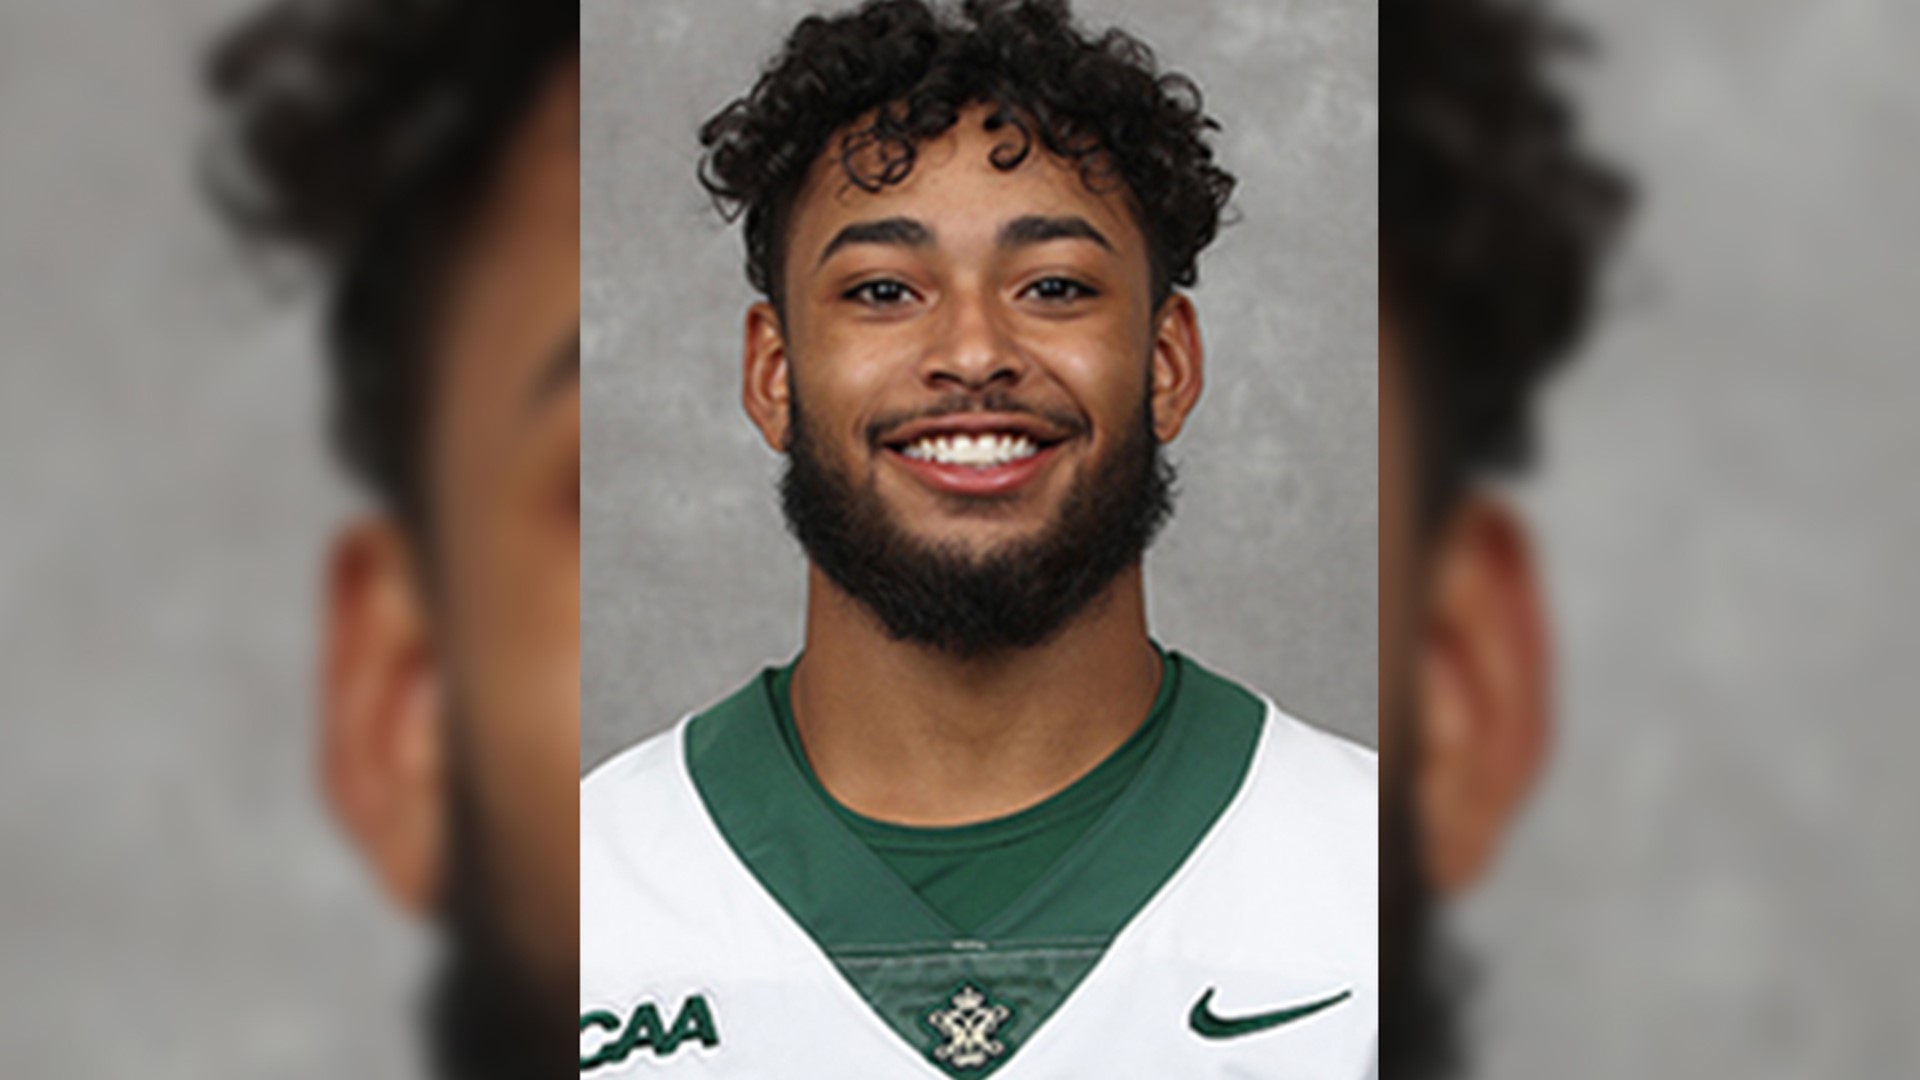 The College of William & Mary is holding a vigil for Nathan Evans, the running back who was shot and killed in Norfolk, at Kaplan Arena at 7 p.m.